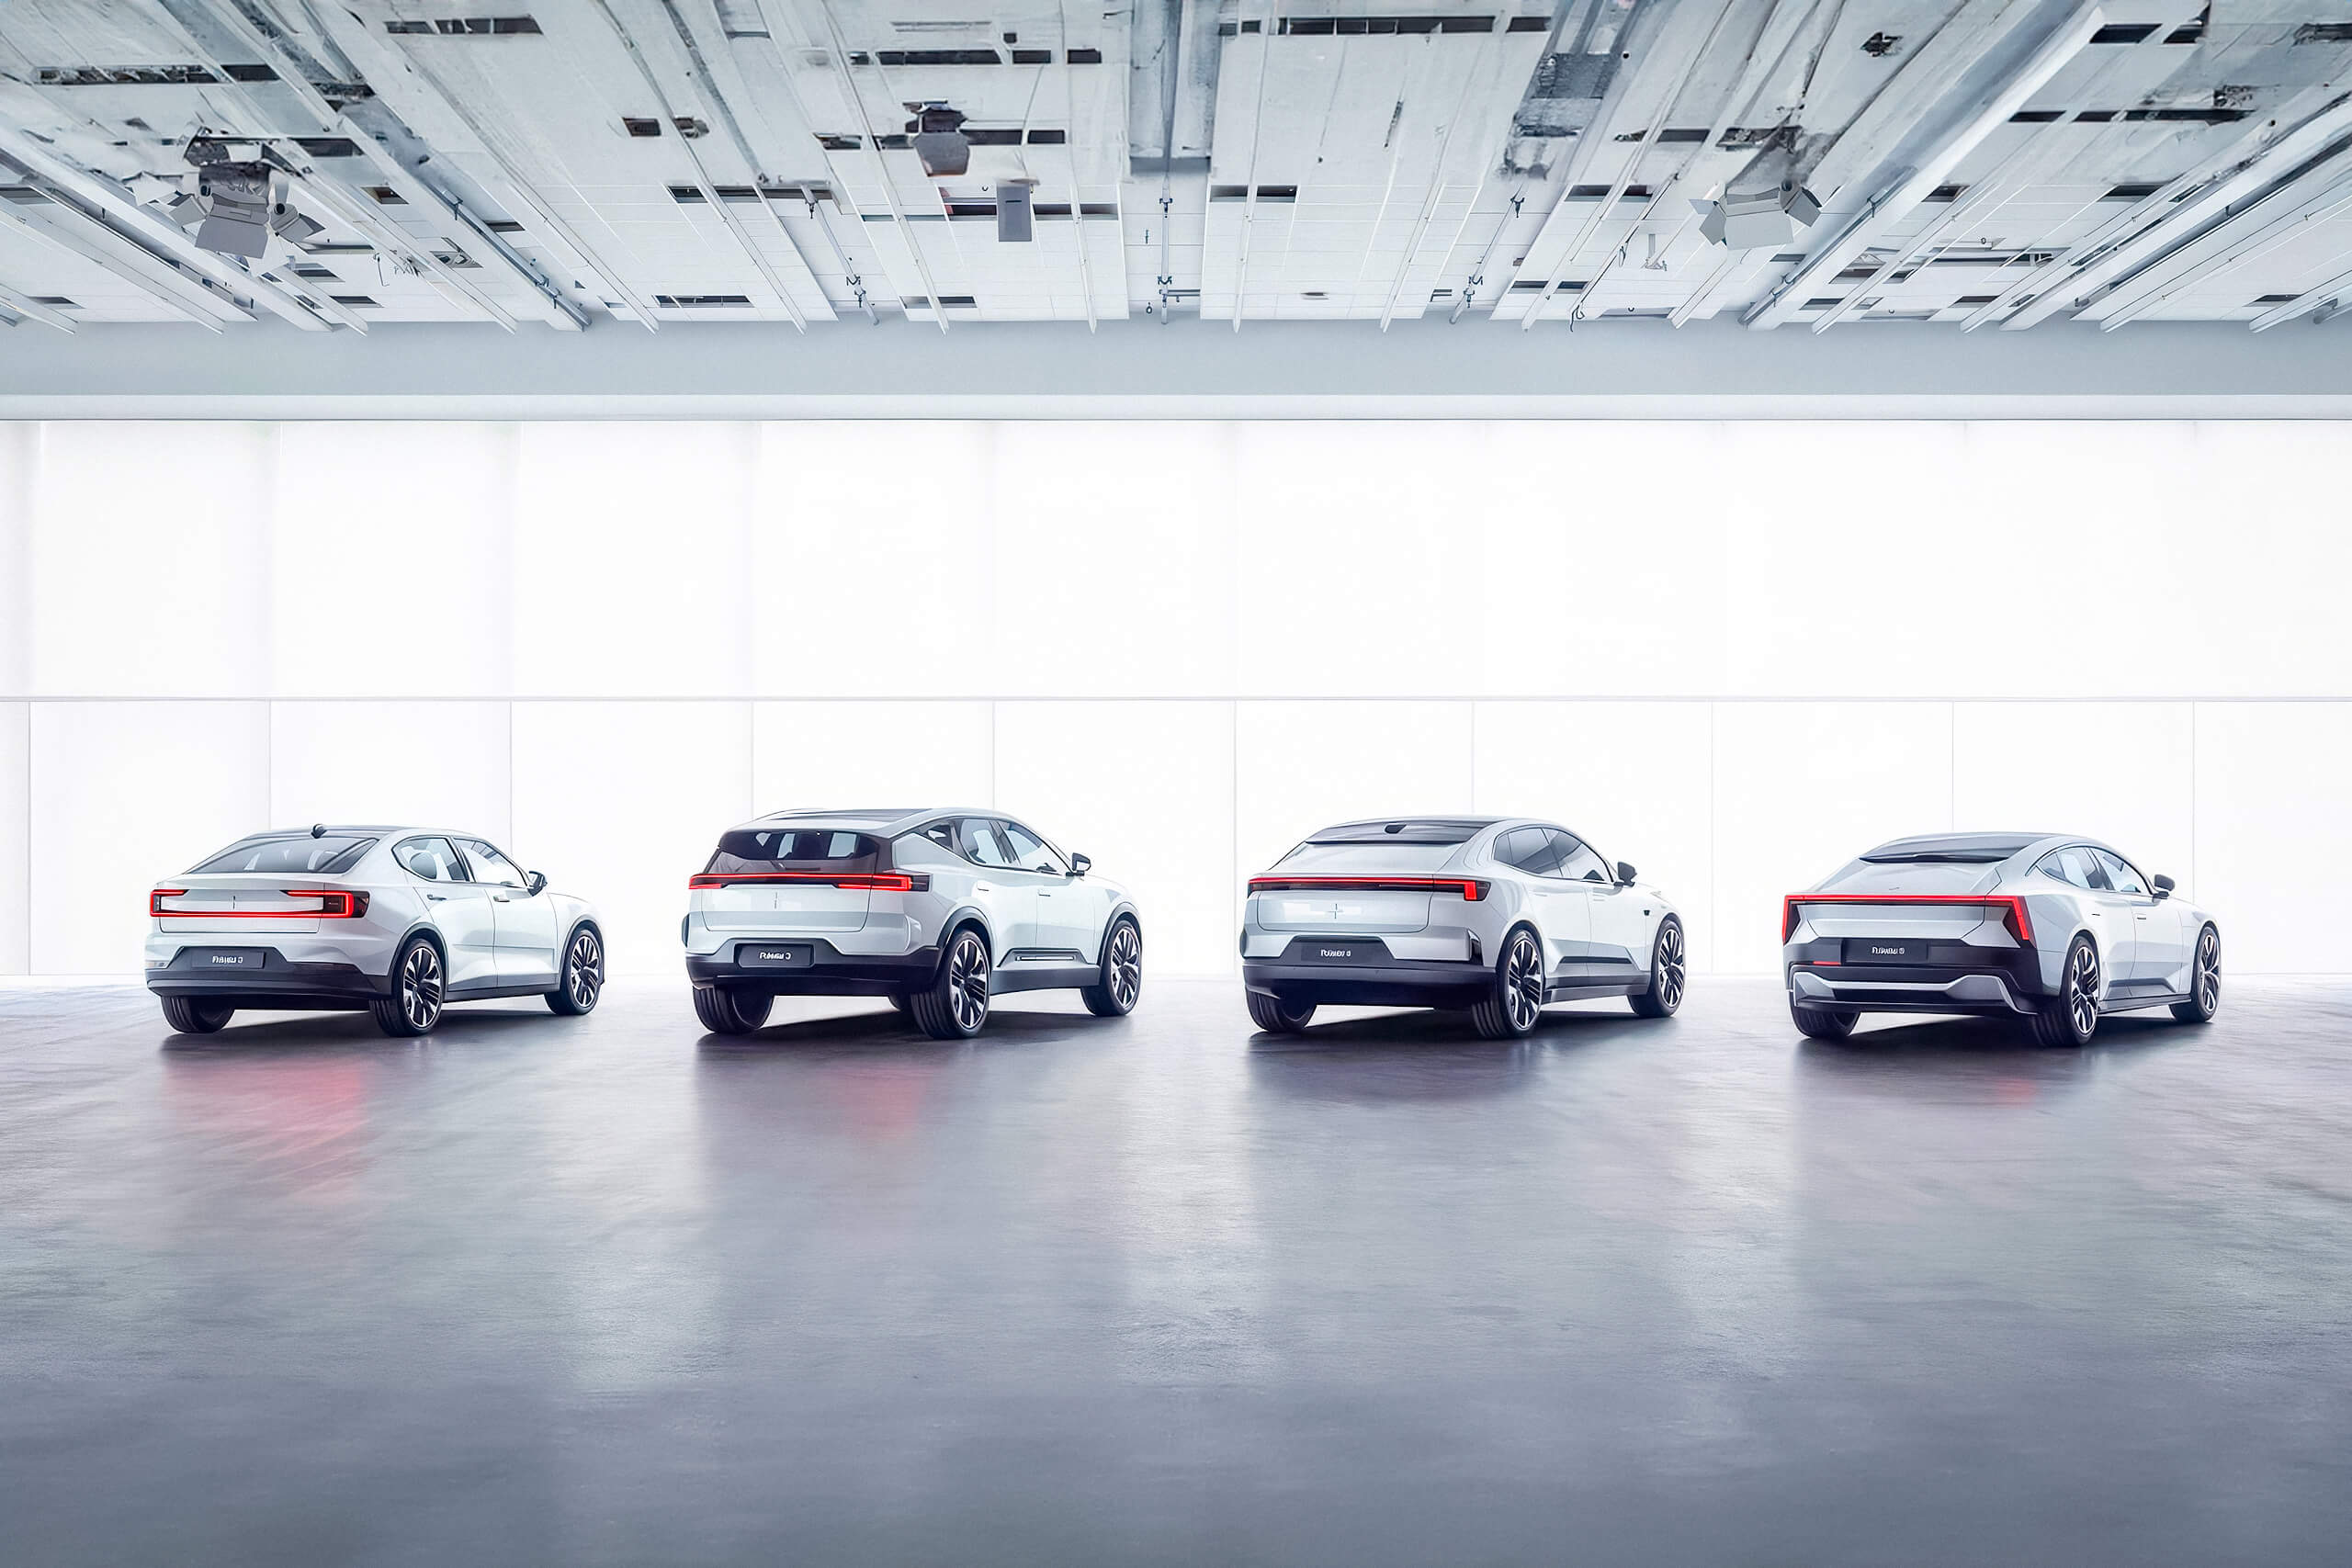 Polestar sales are growing, but the company is cutting staff and spending